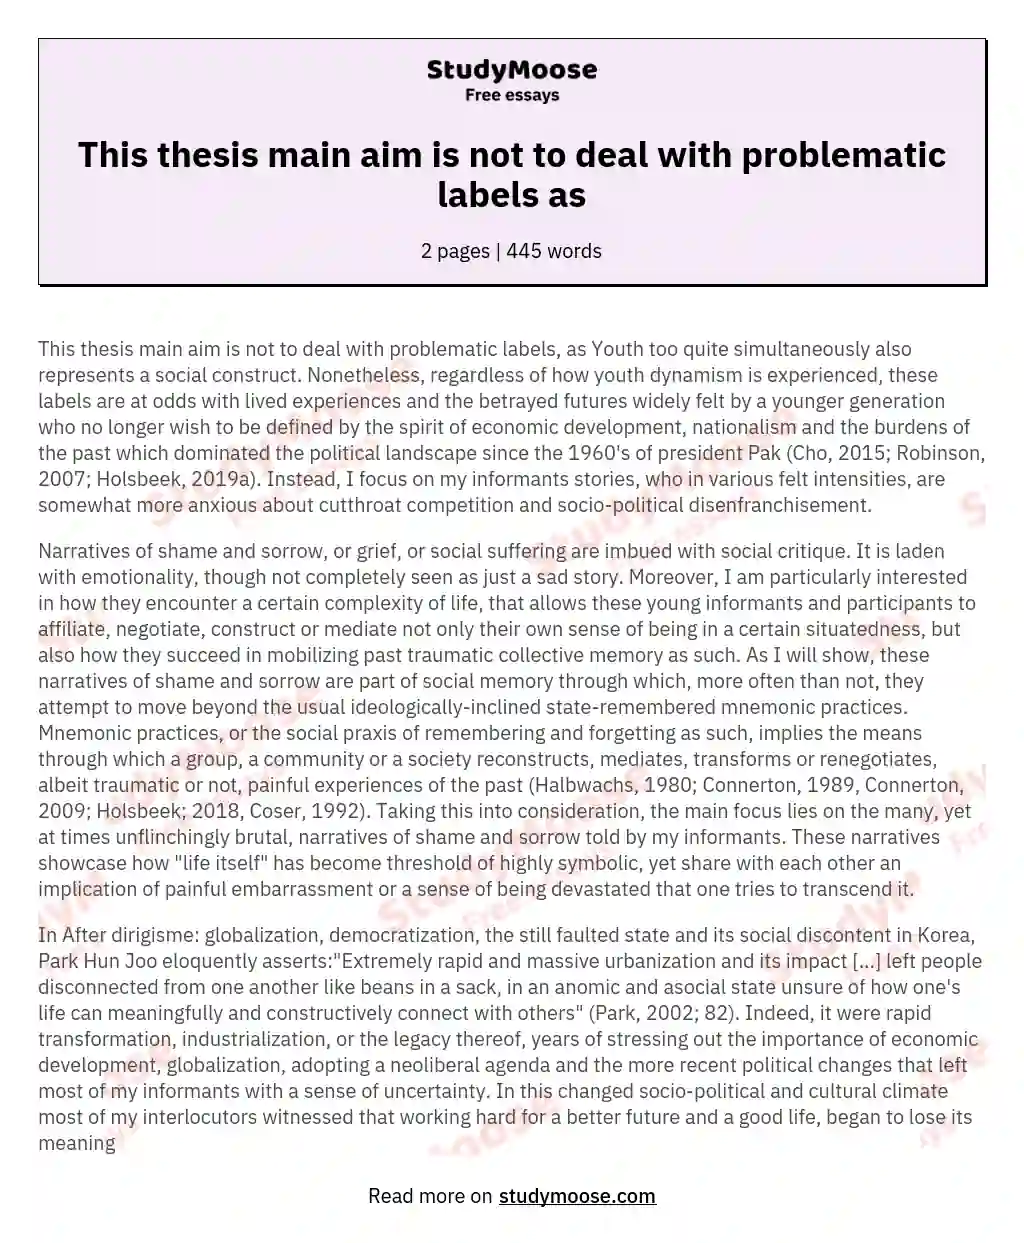 This thesis main aim is not to deal with problematic labels as essay